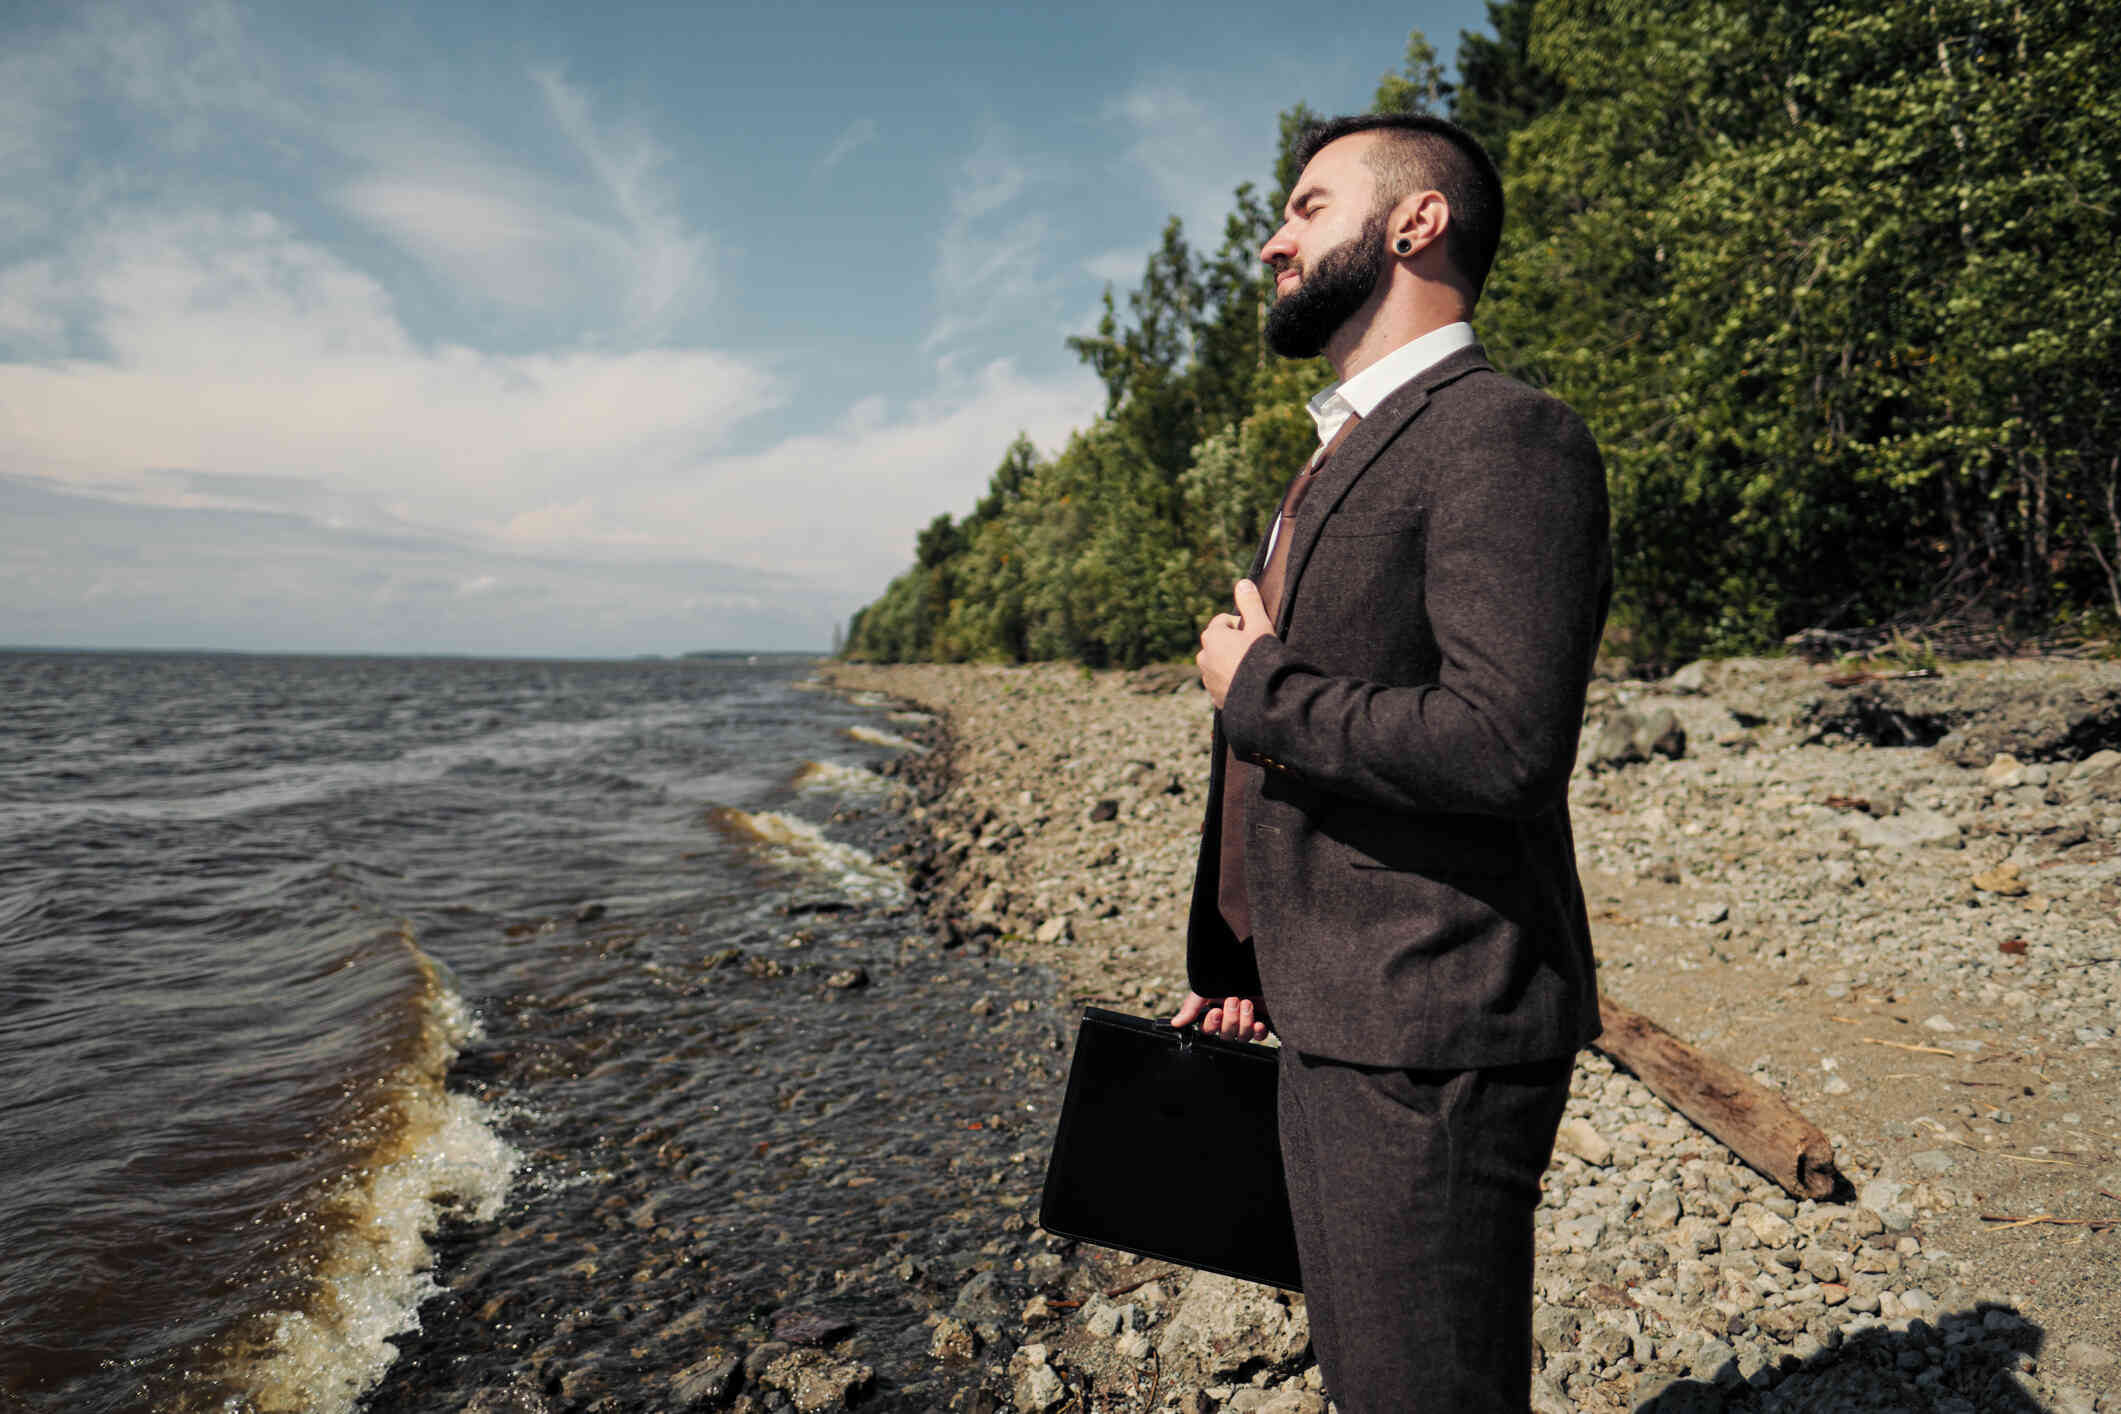 A man in a buisness suit and briefcase stands near the ocean and gazes out while deep in thought.